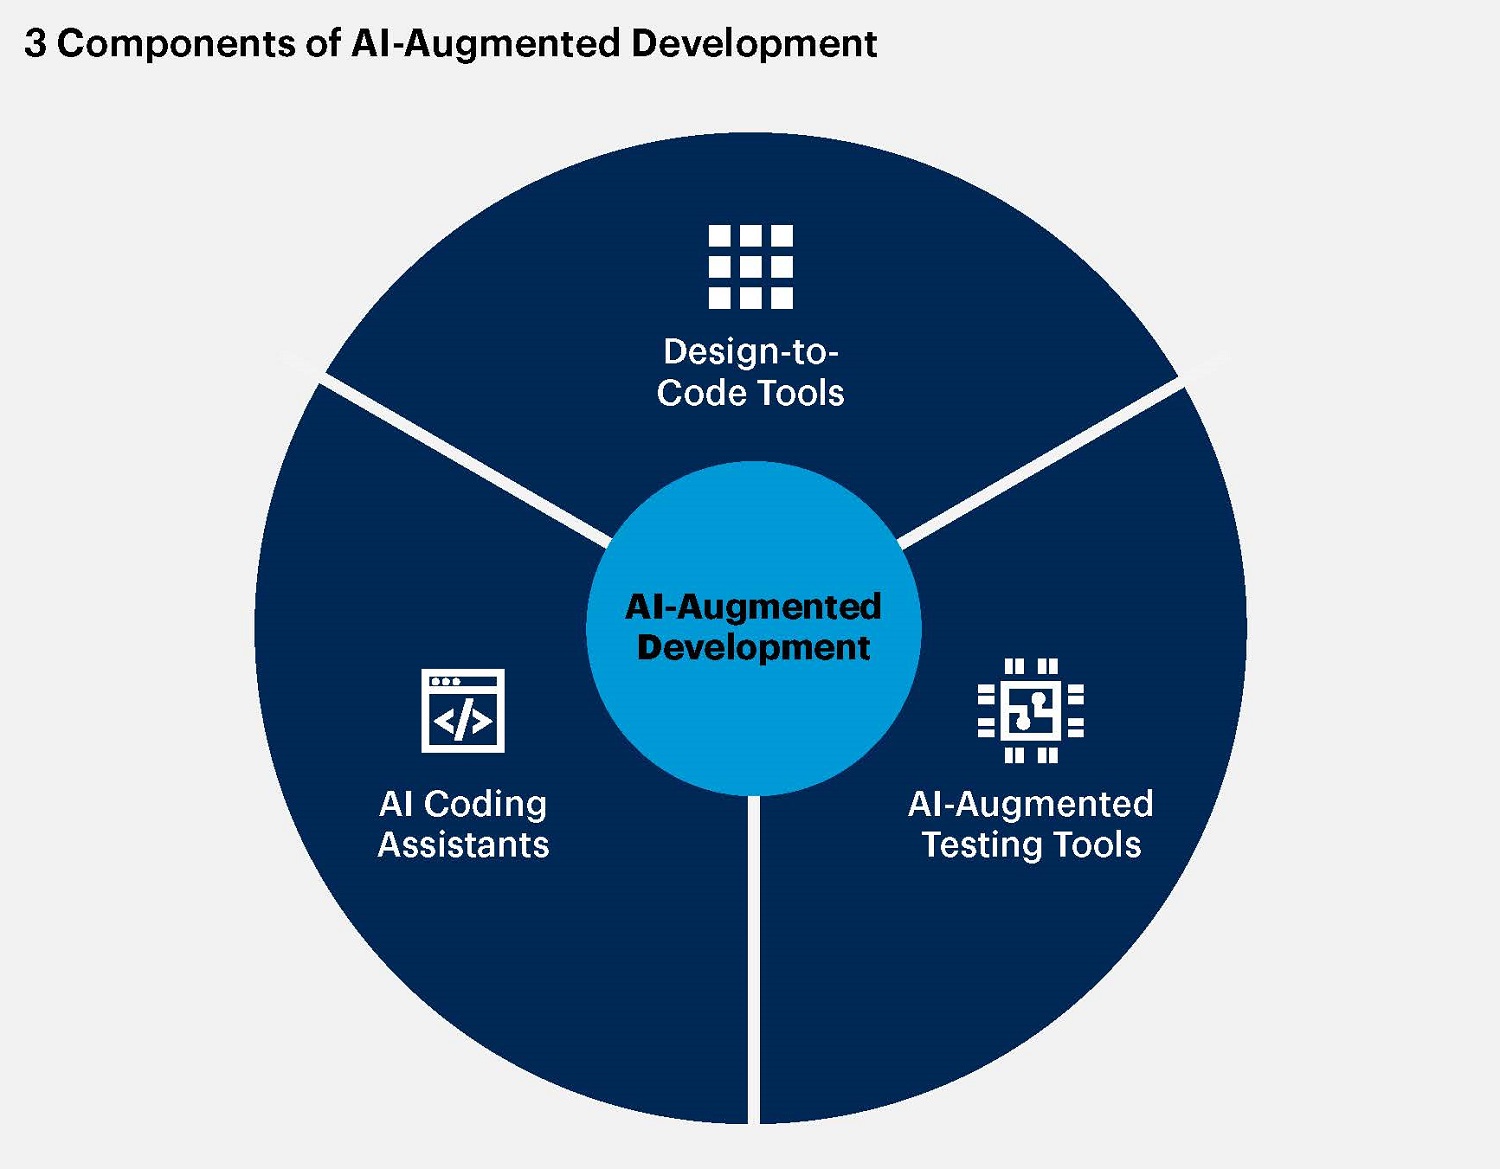 AI-Augmented Development is the use of AI technologies, such as generative AI and machine learning (ML), to aid software engineers in creating, testing and delivering applications. Cr: Gartner